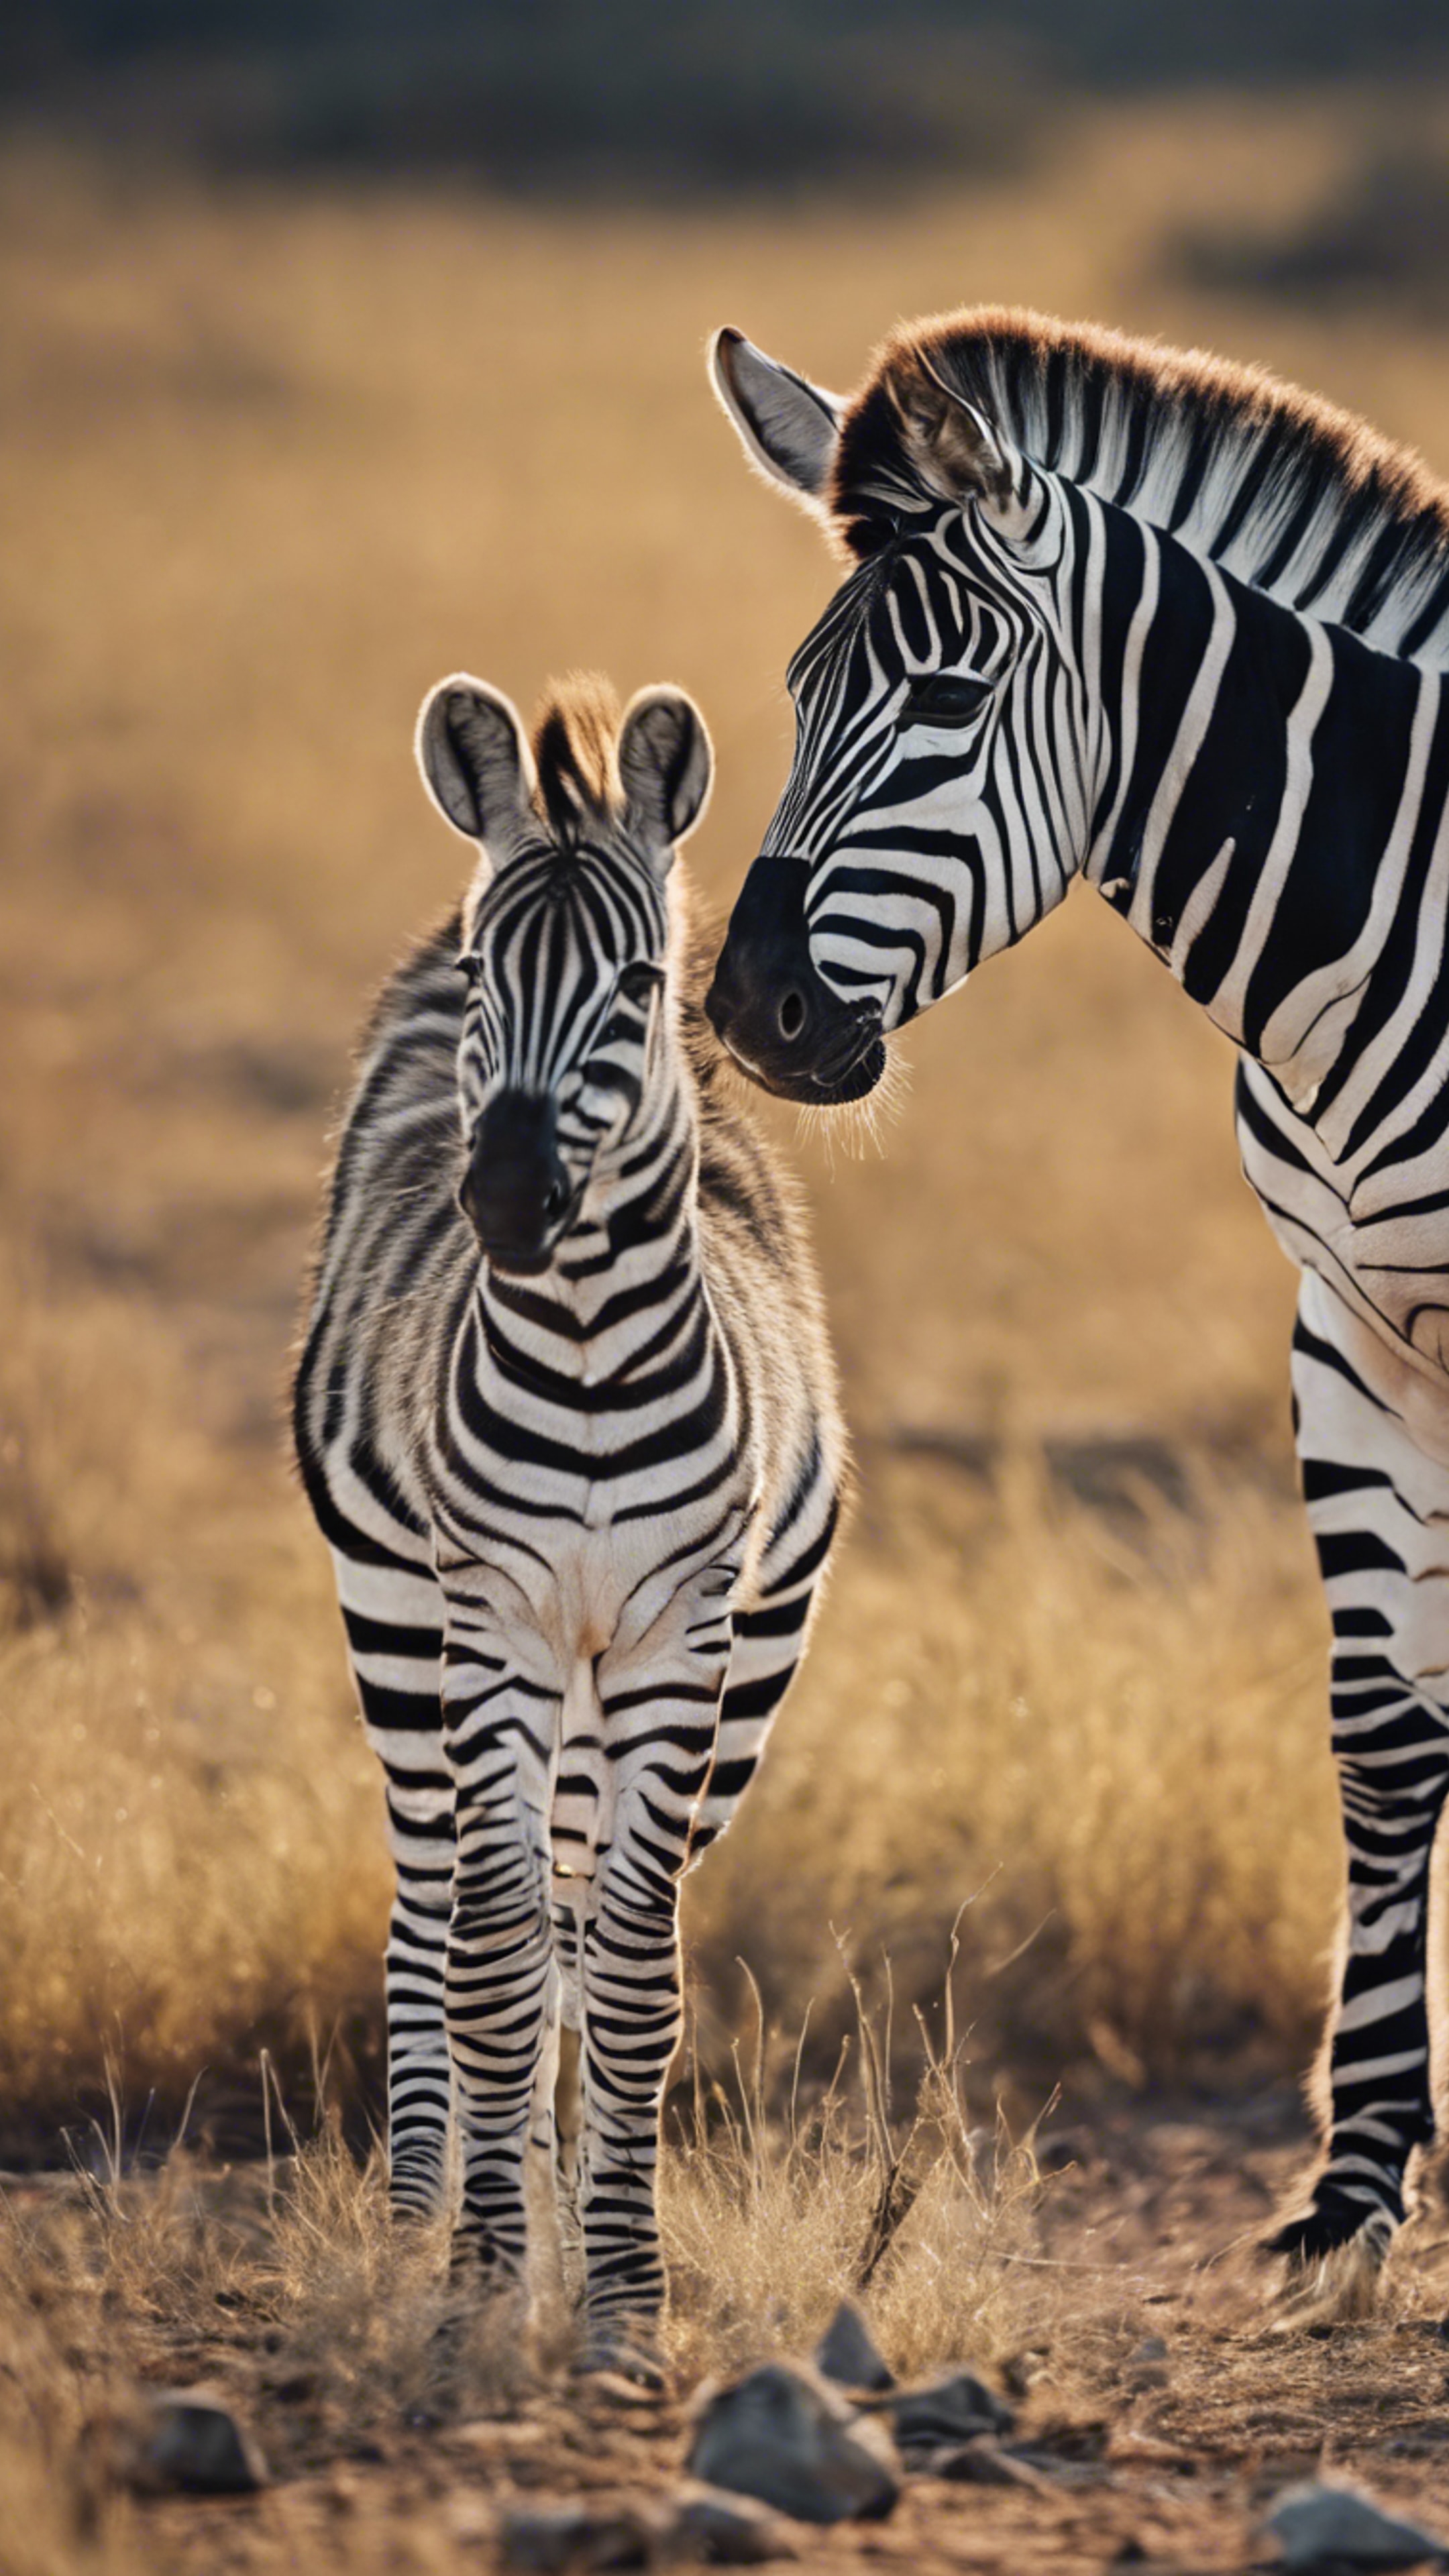 An adult zebra protectively standing over its newborn in the beautiful wild.壁紙[8c6d6e6d73ee4968a49c]